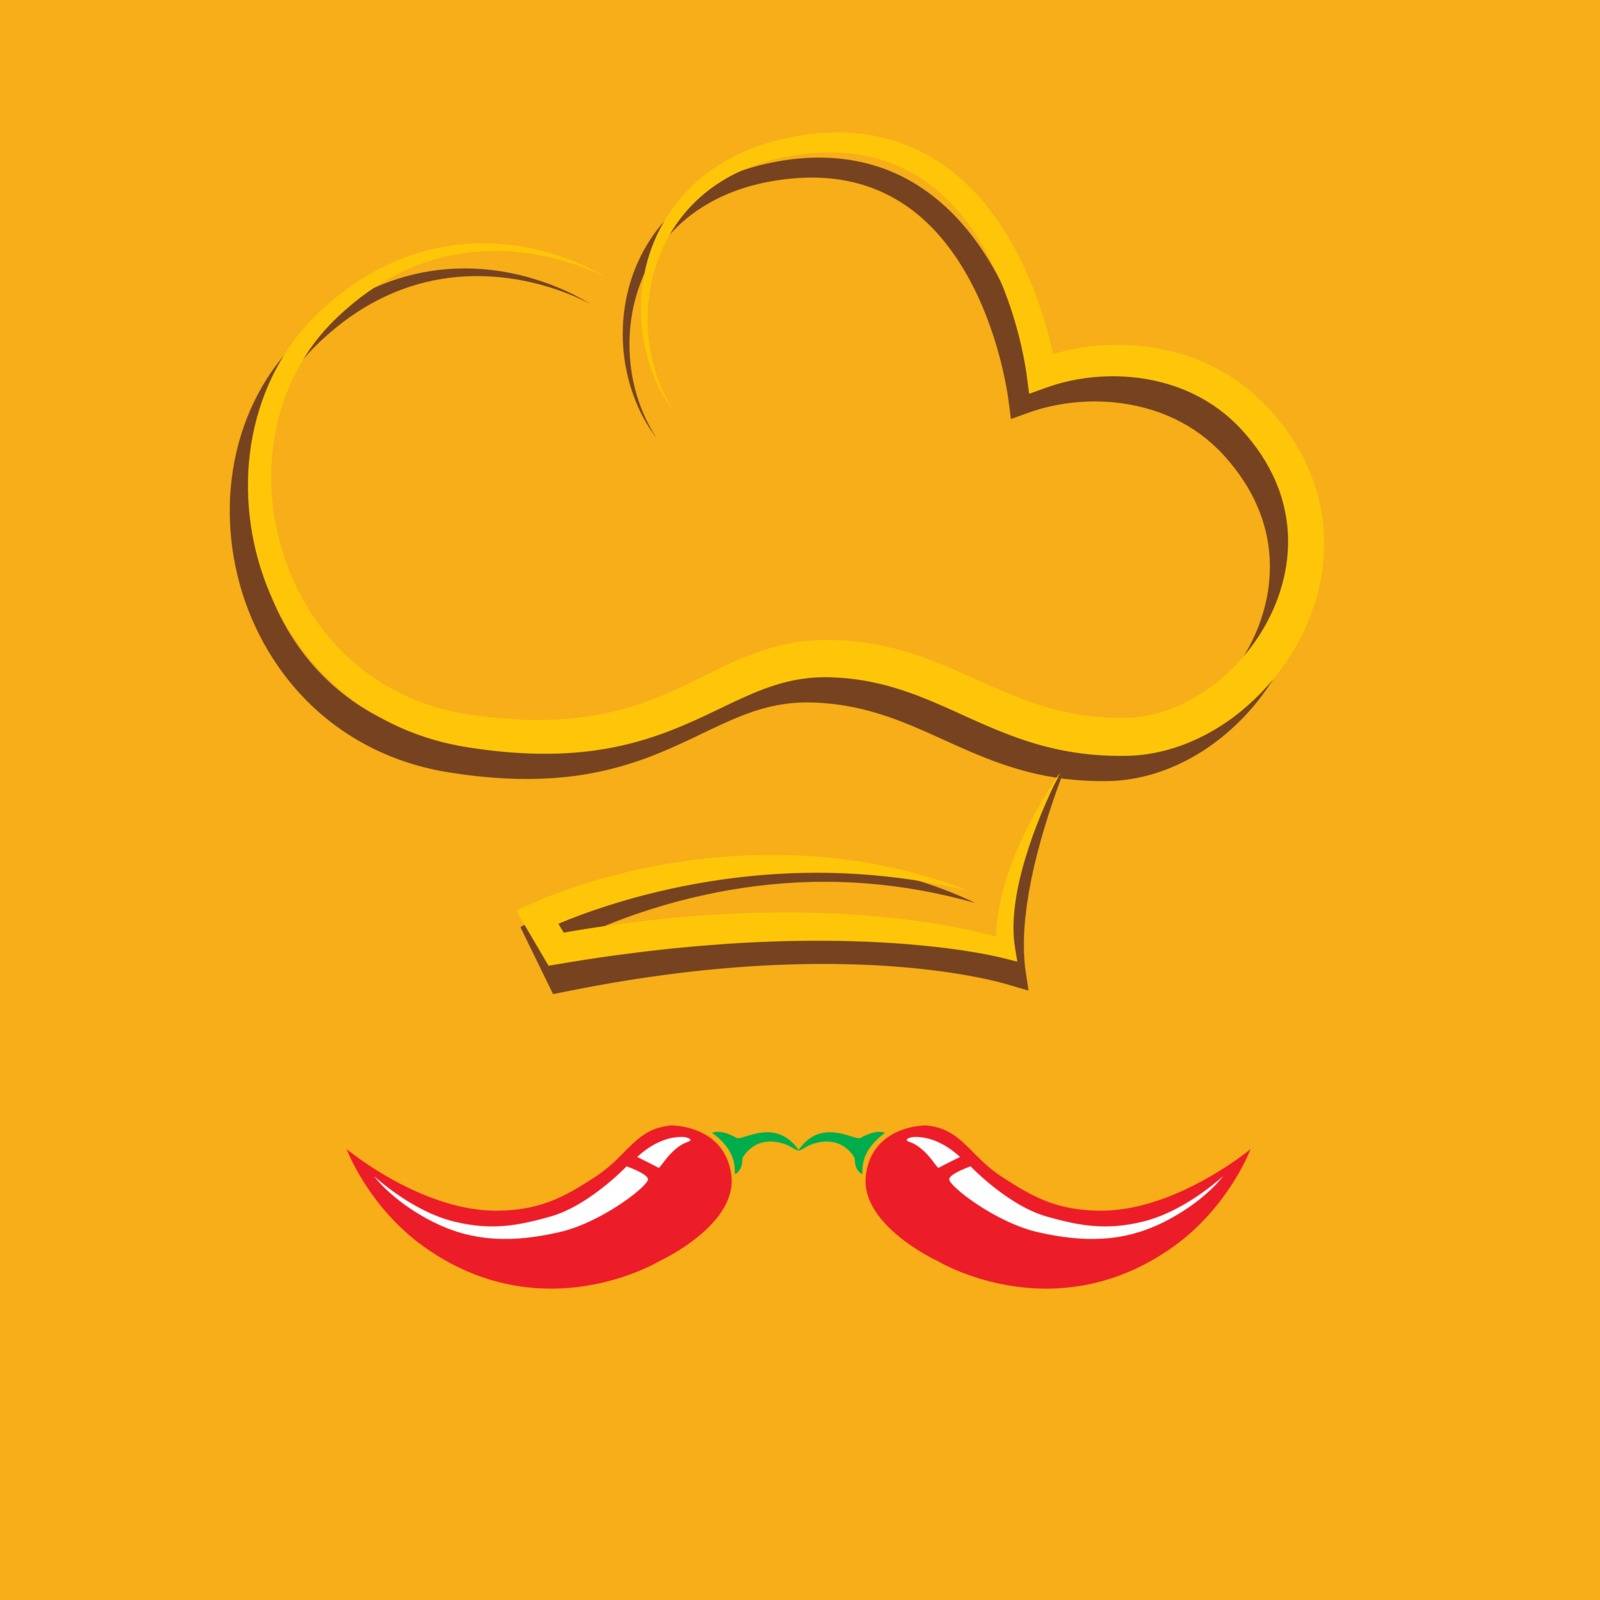 Vecror illustration of a cook hat with pepper mustache